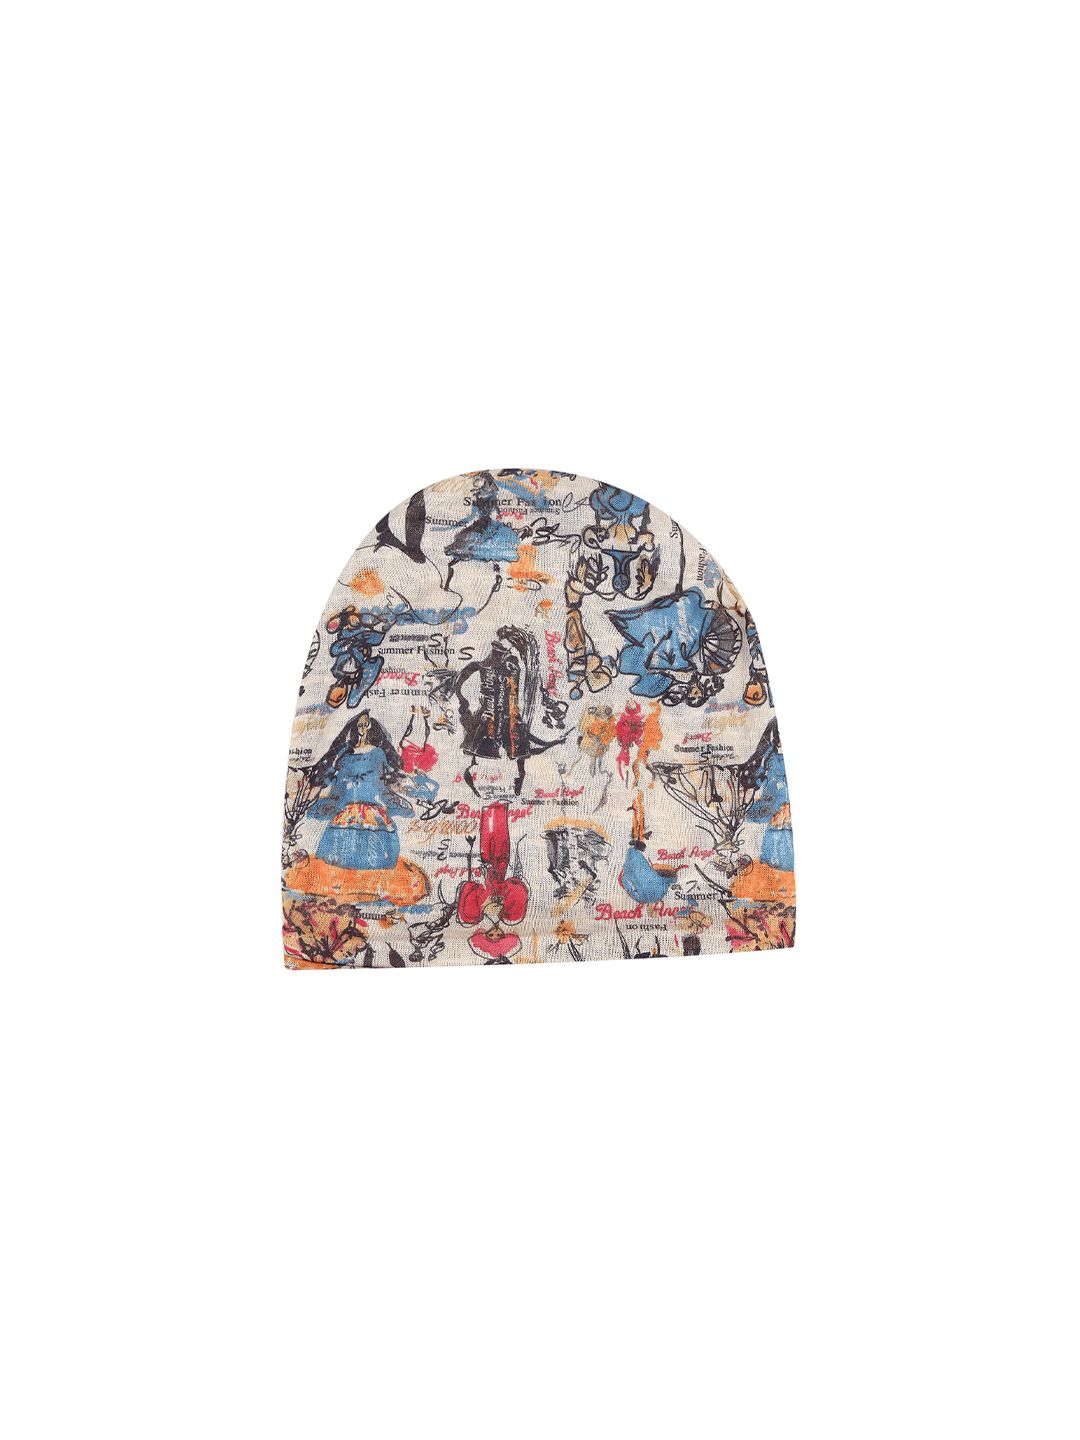 iSWEVEN Unisex White & Blue Printed Beanie Price in India